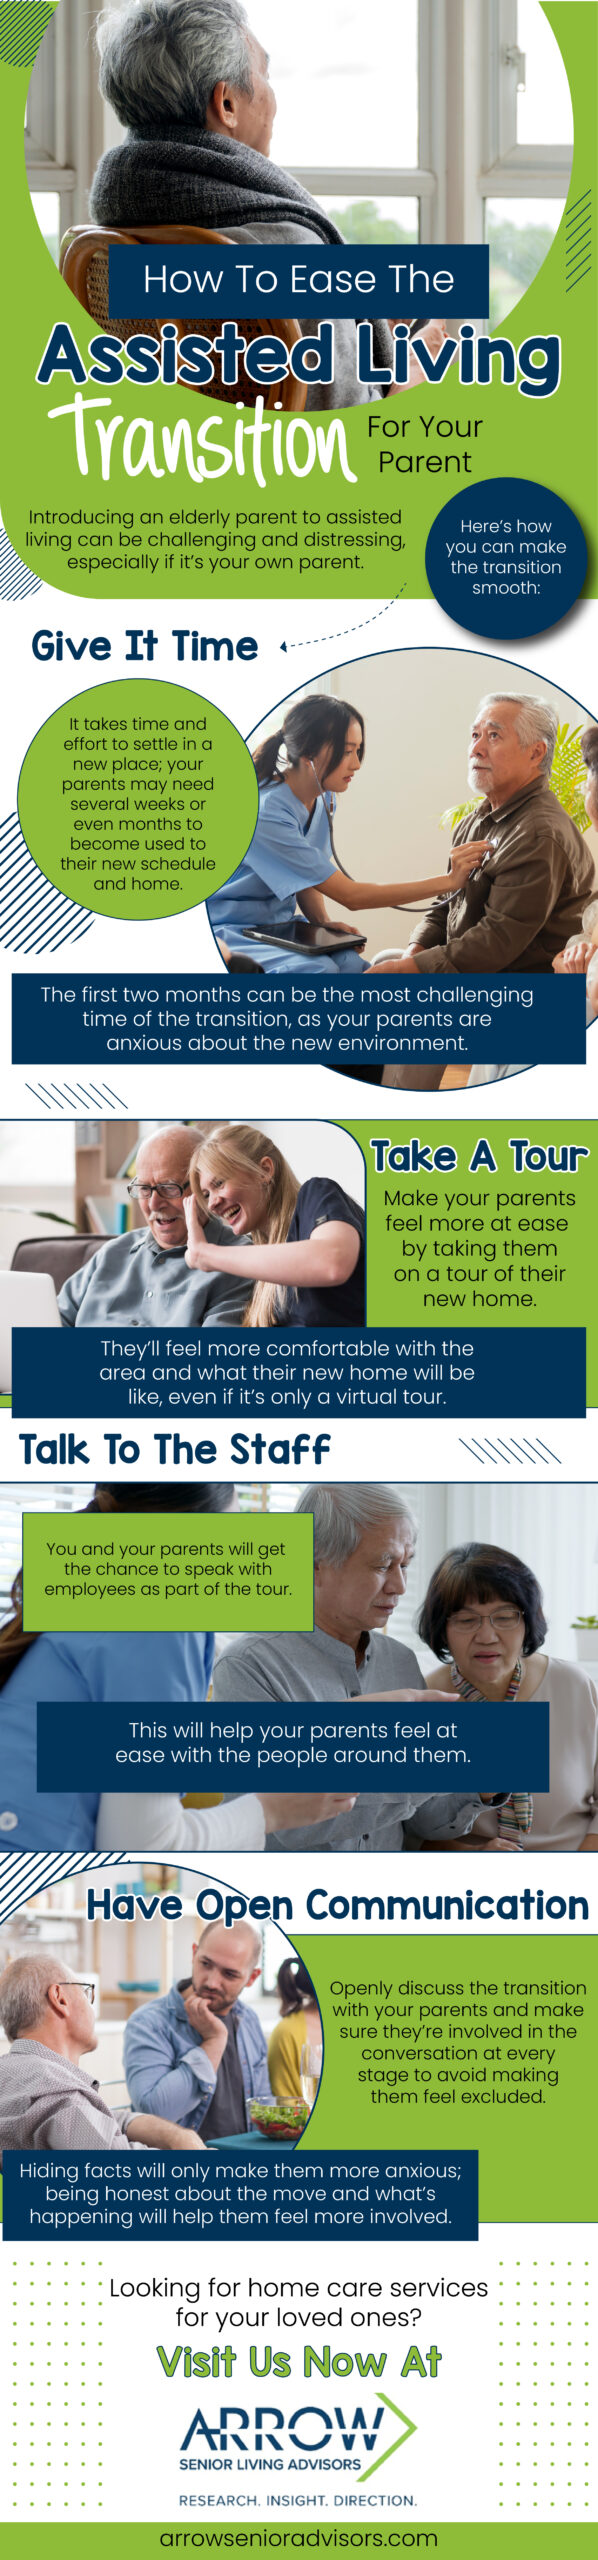 How To Ease The Assisted Living Transition For Your Parent